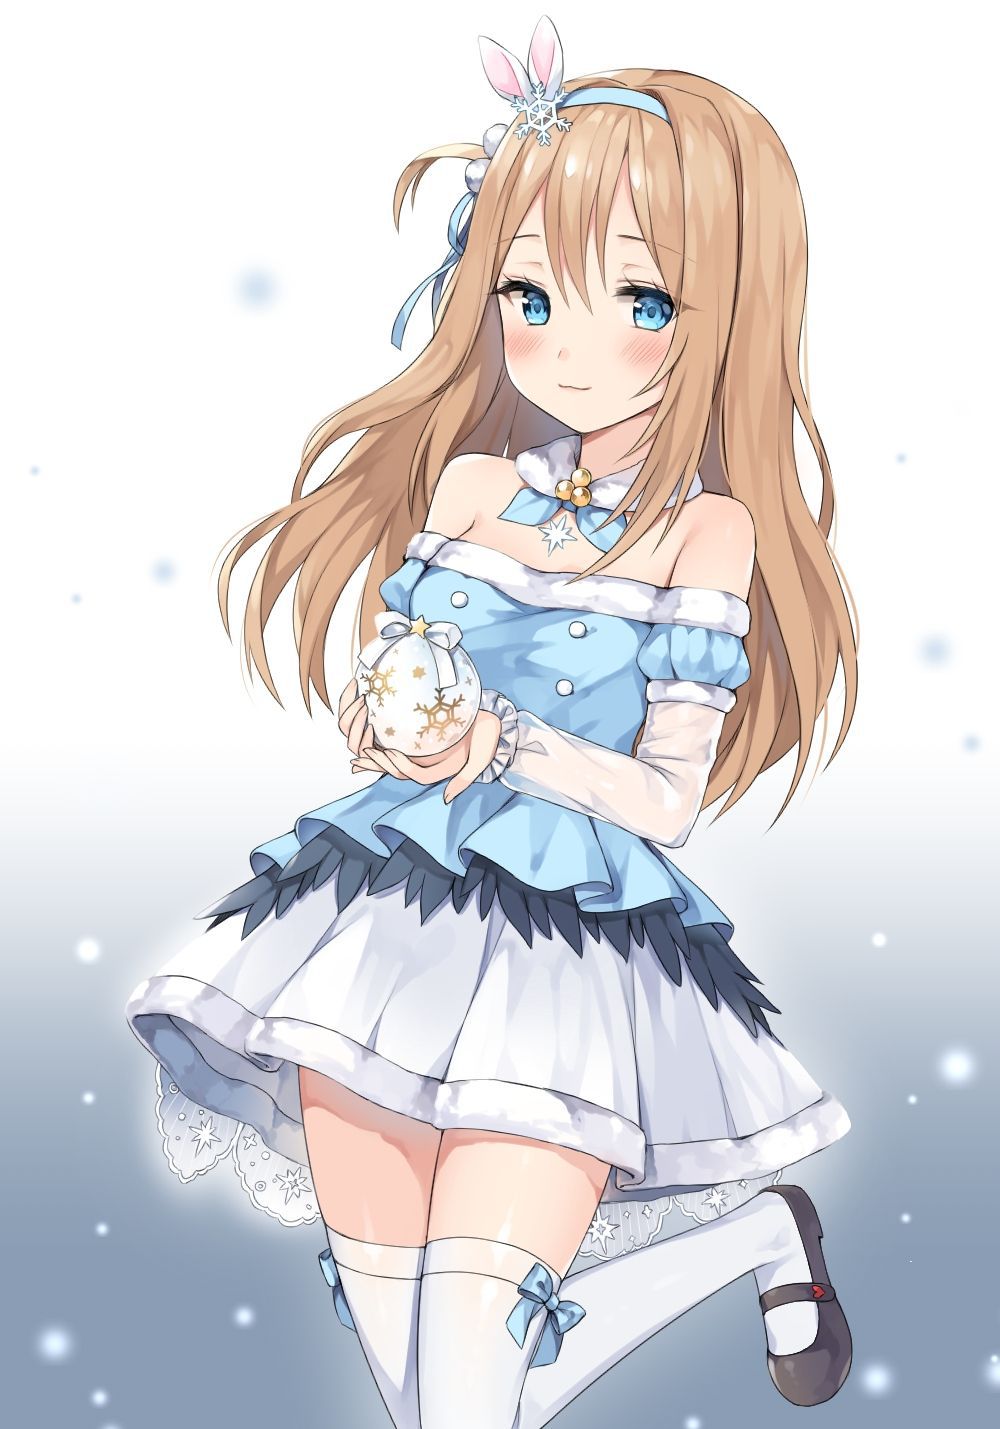 [Secondary ZIP] image of the thighhighs girl showing annoying thigh 6